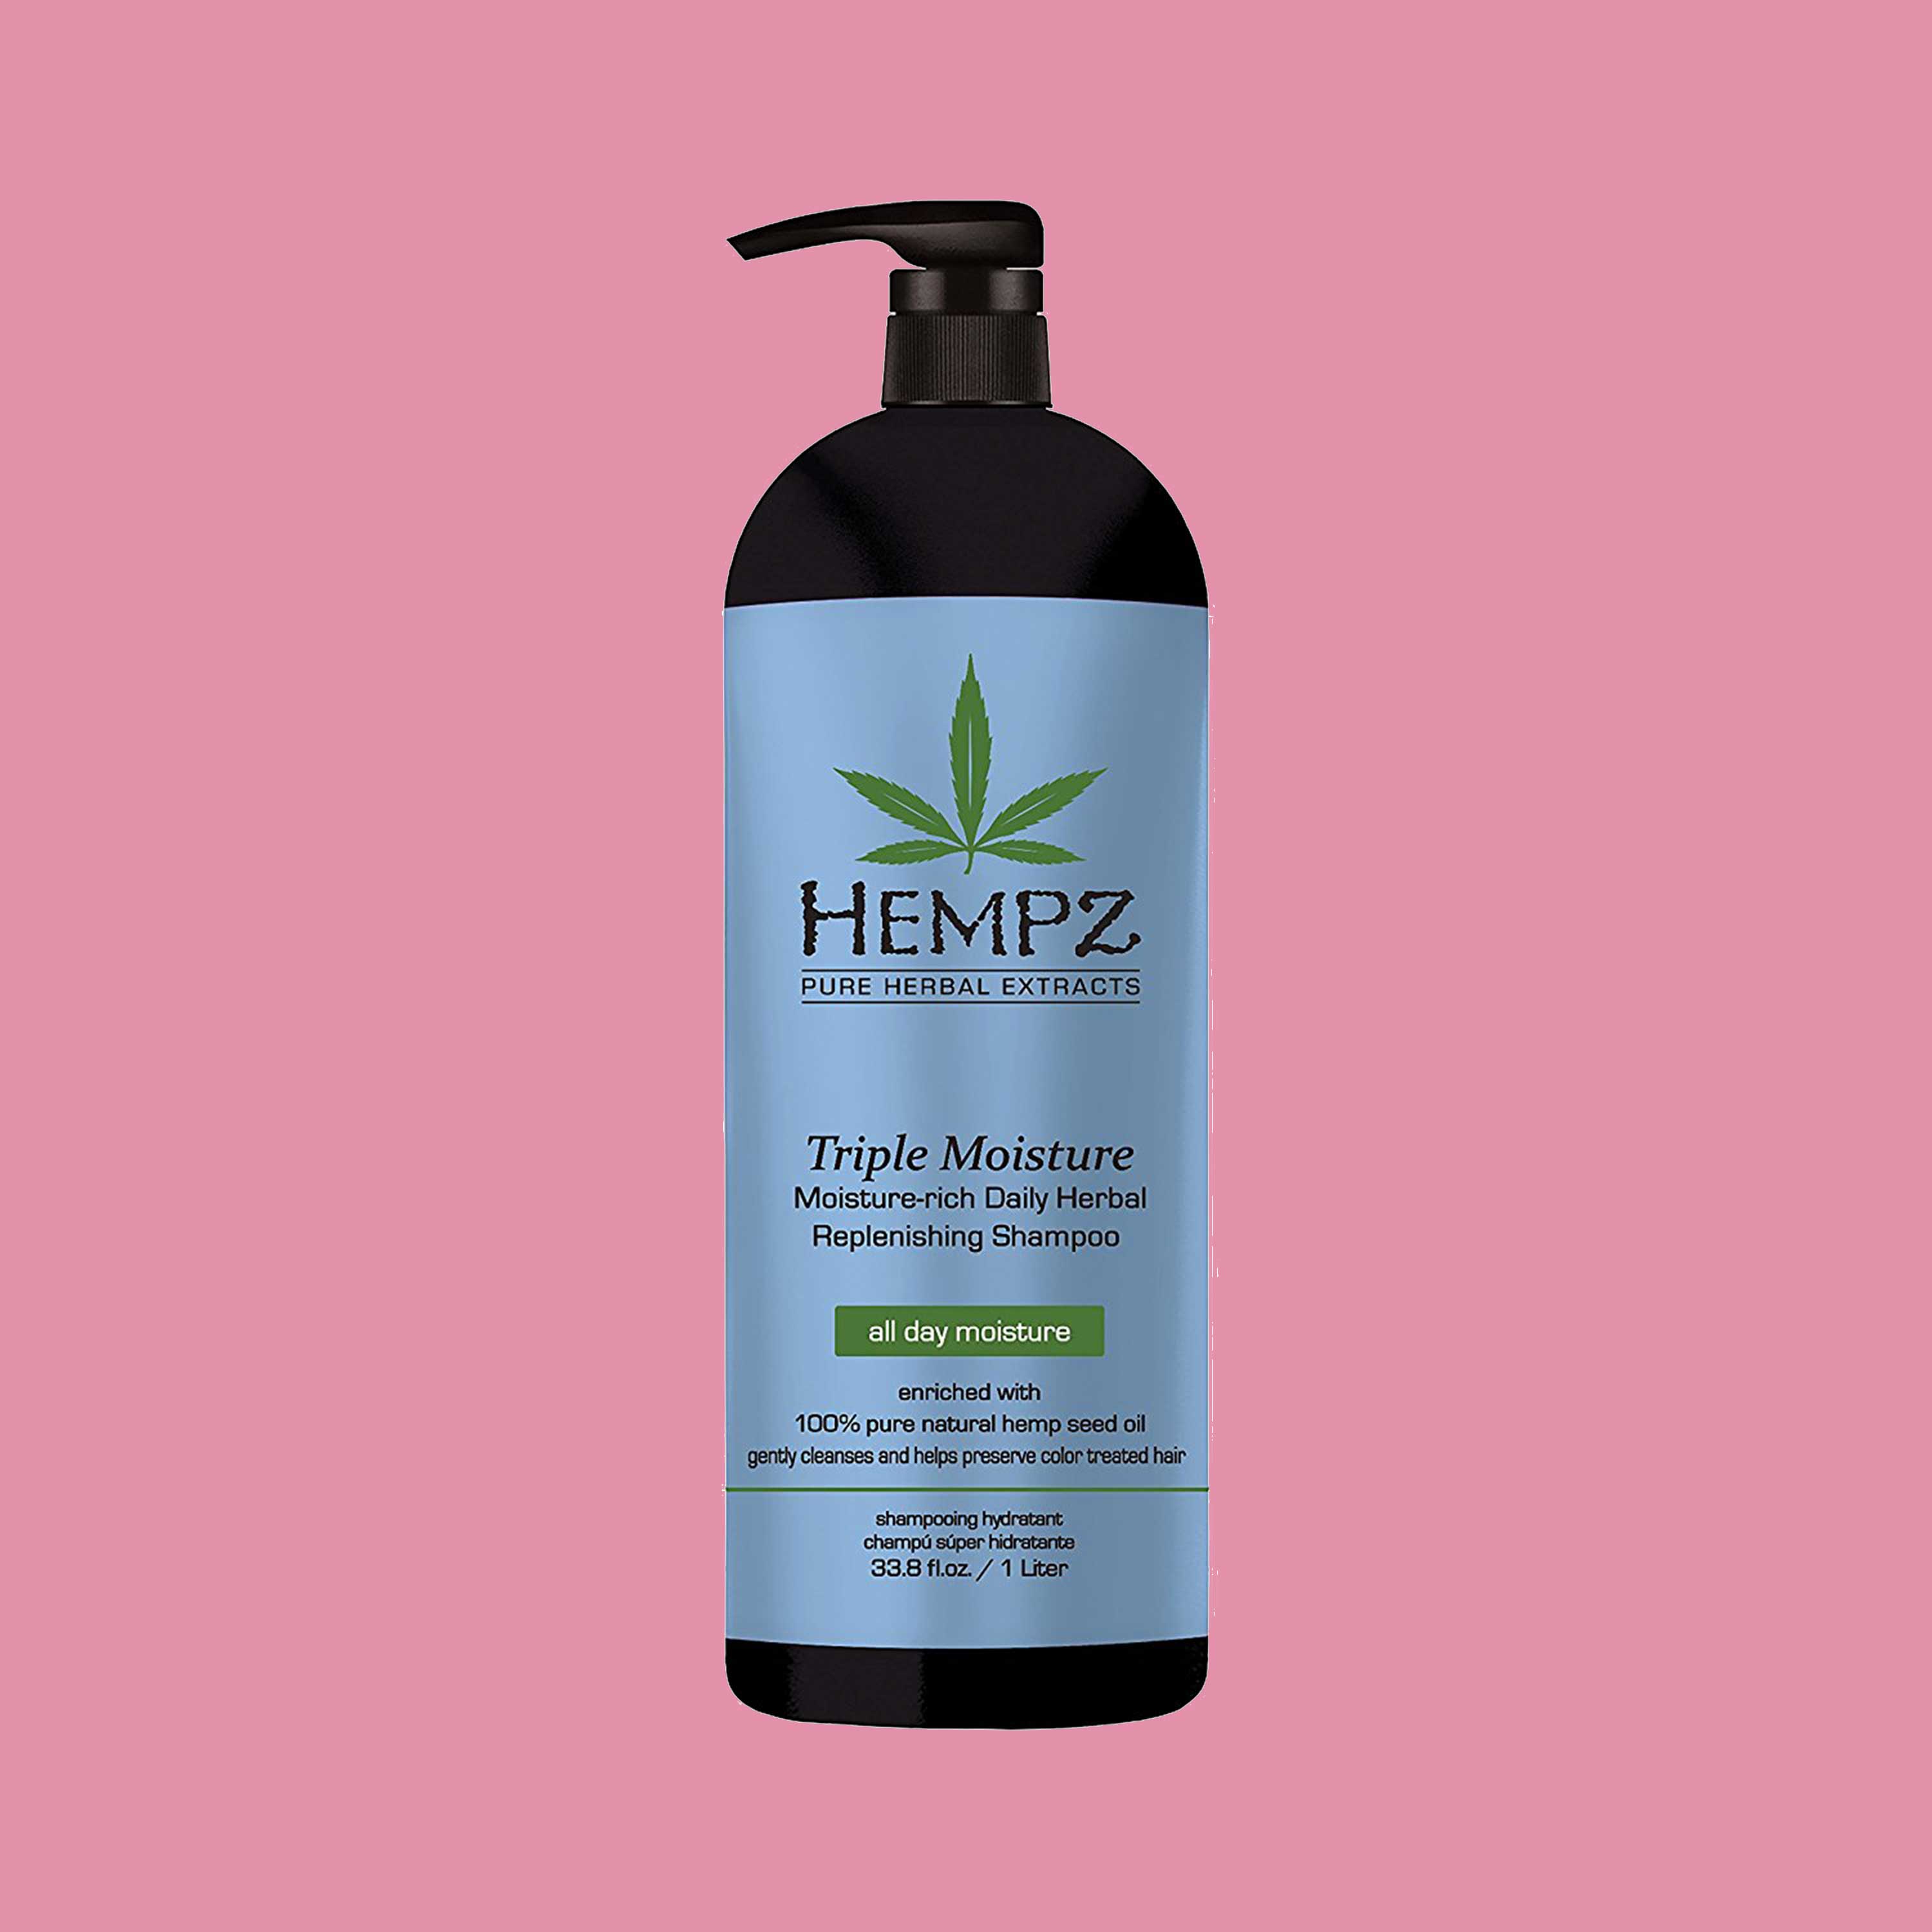 12 Products That Prove Hemp Seed Oil Is Everyone's New Favorite Ingredient
